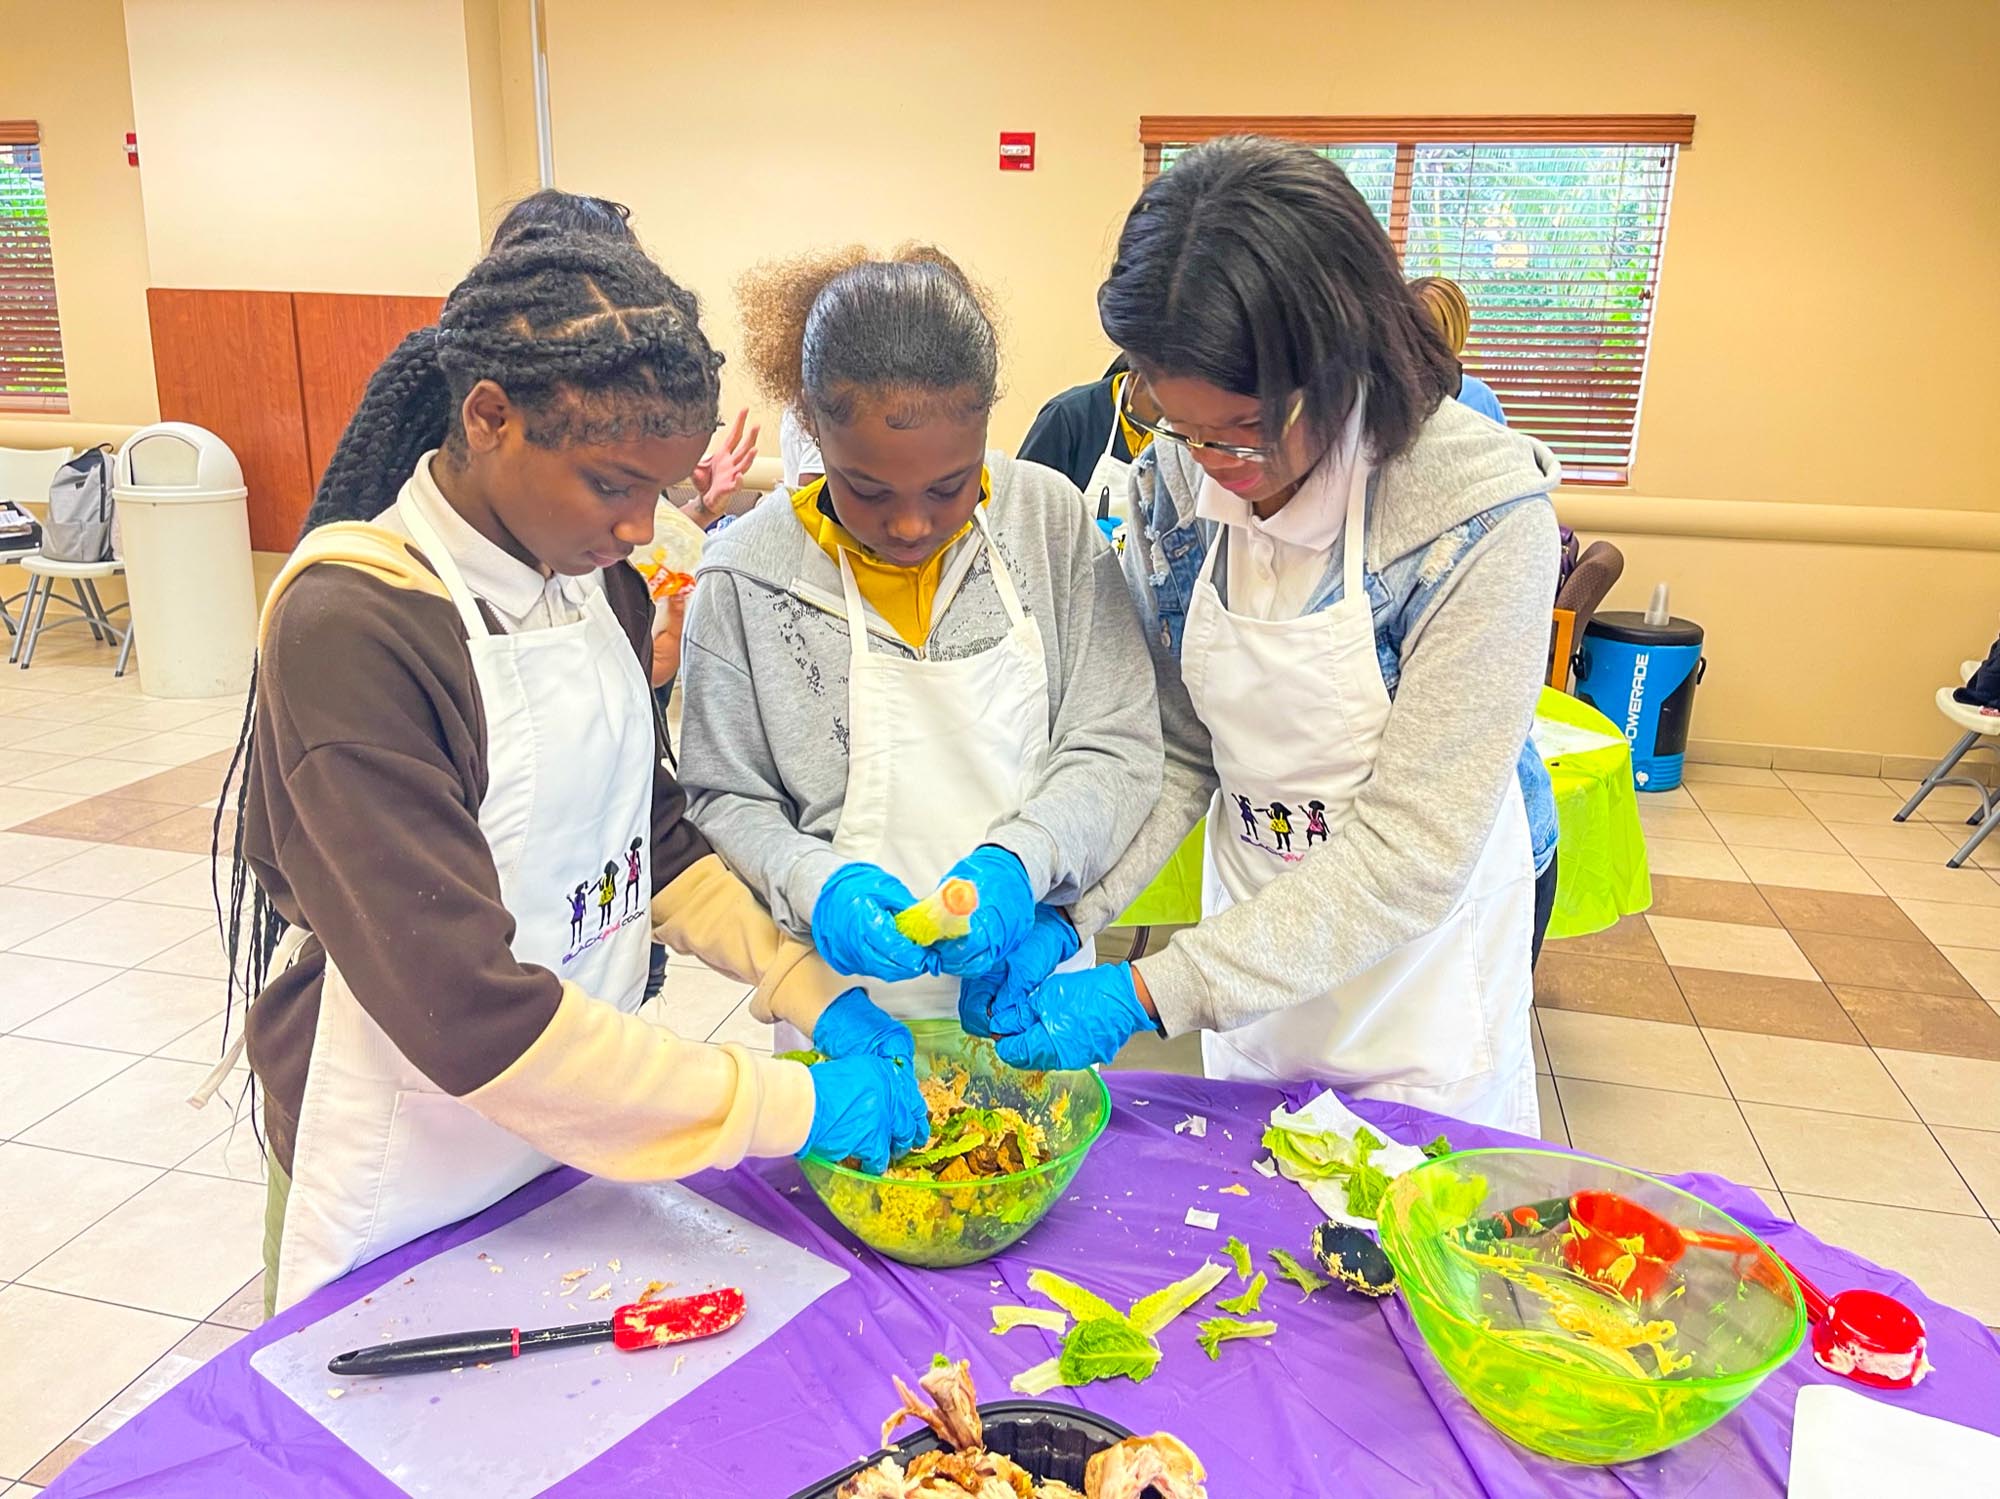 Honey Bugs participating in a hands-on cooking demonstration facilitated by Black Girls Cook, who provided all the ingredients, cookware and recipes for our girls.